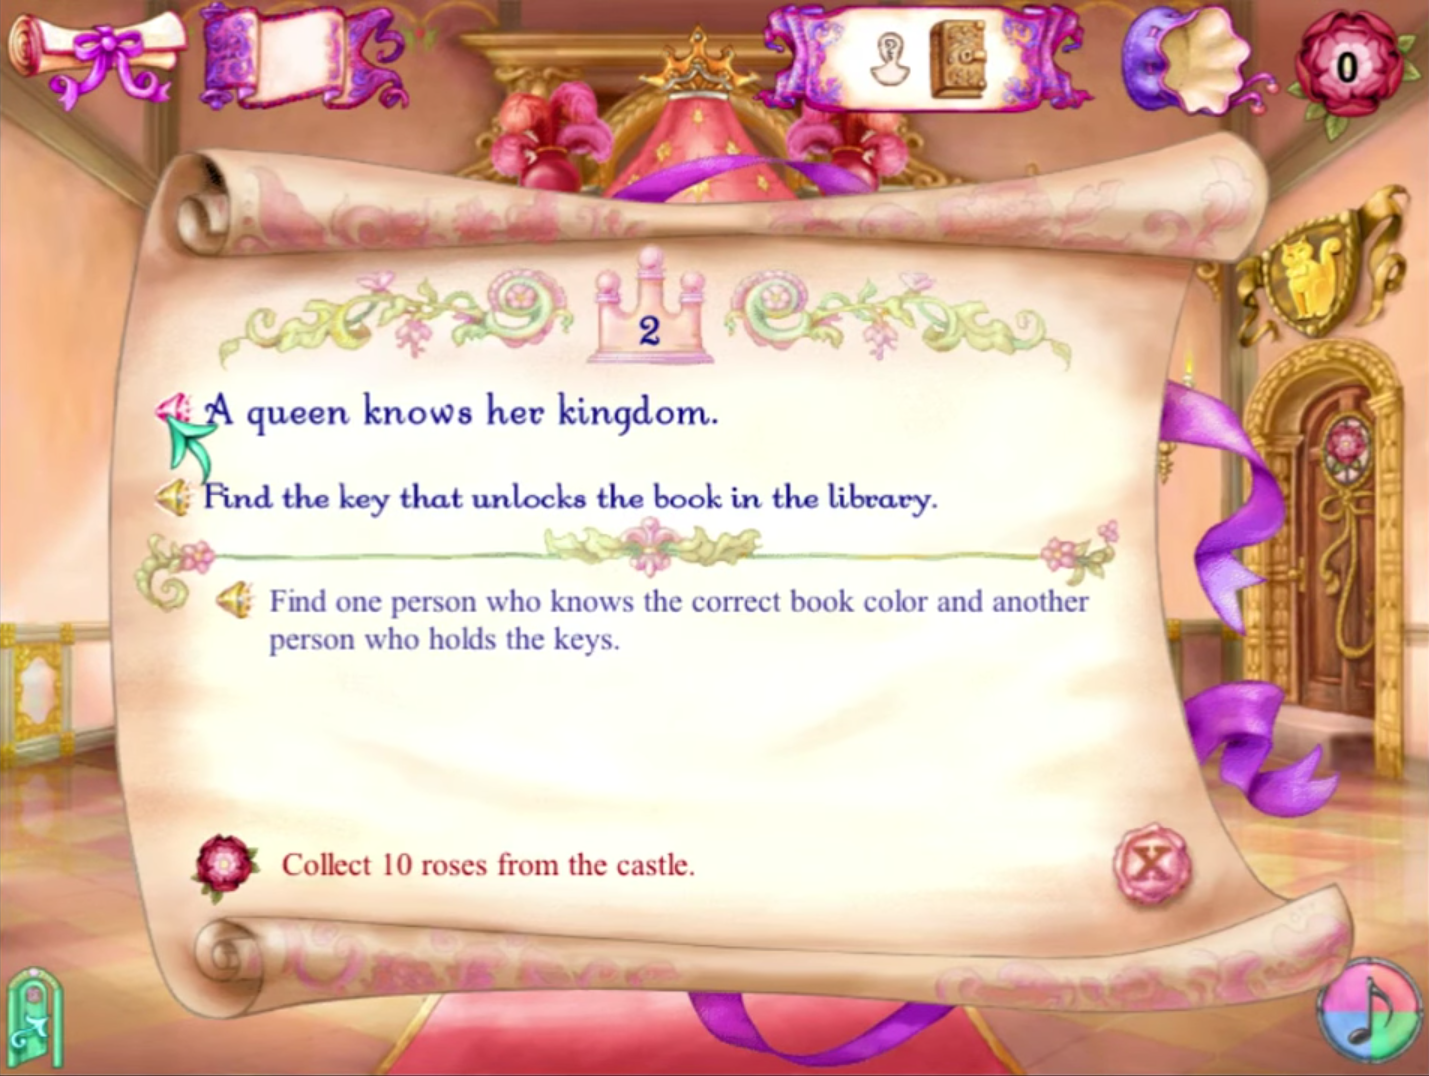 Download Game Barbie as the Princess and the Pauper Gratis